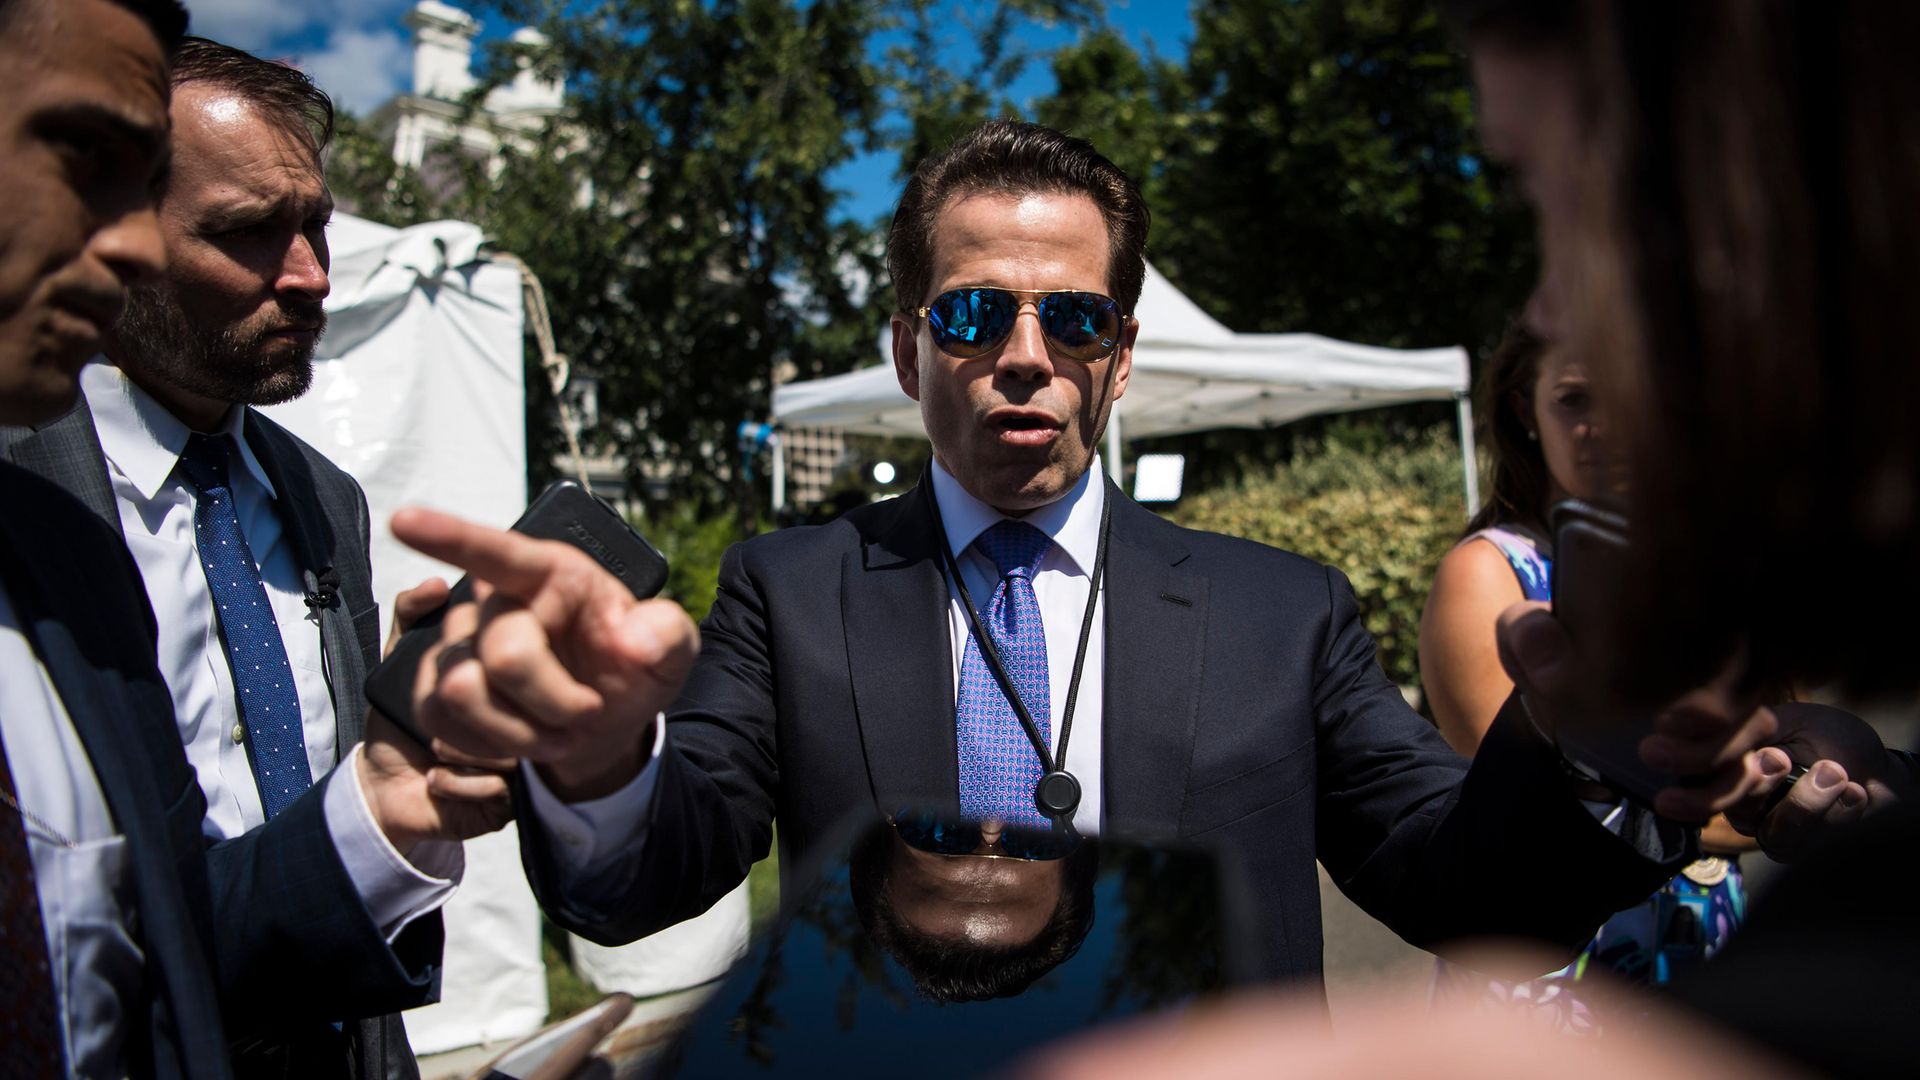 Anthony Scaramucci briefs the media outside the West Wing during his 11-day spell as White House communications director in 2017 - Credit: Jabin Botsford/The Washington Post via Getty Images